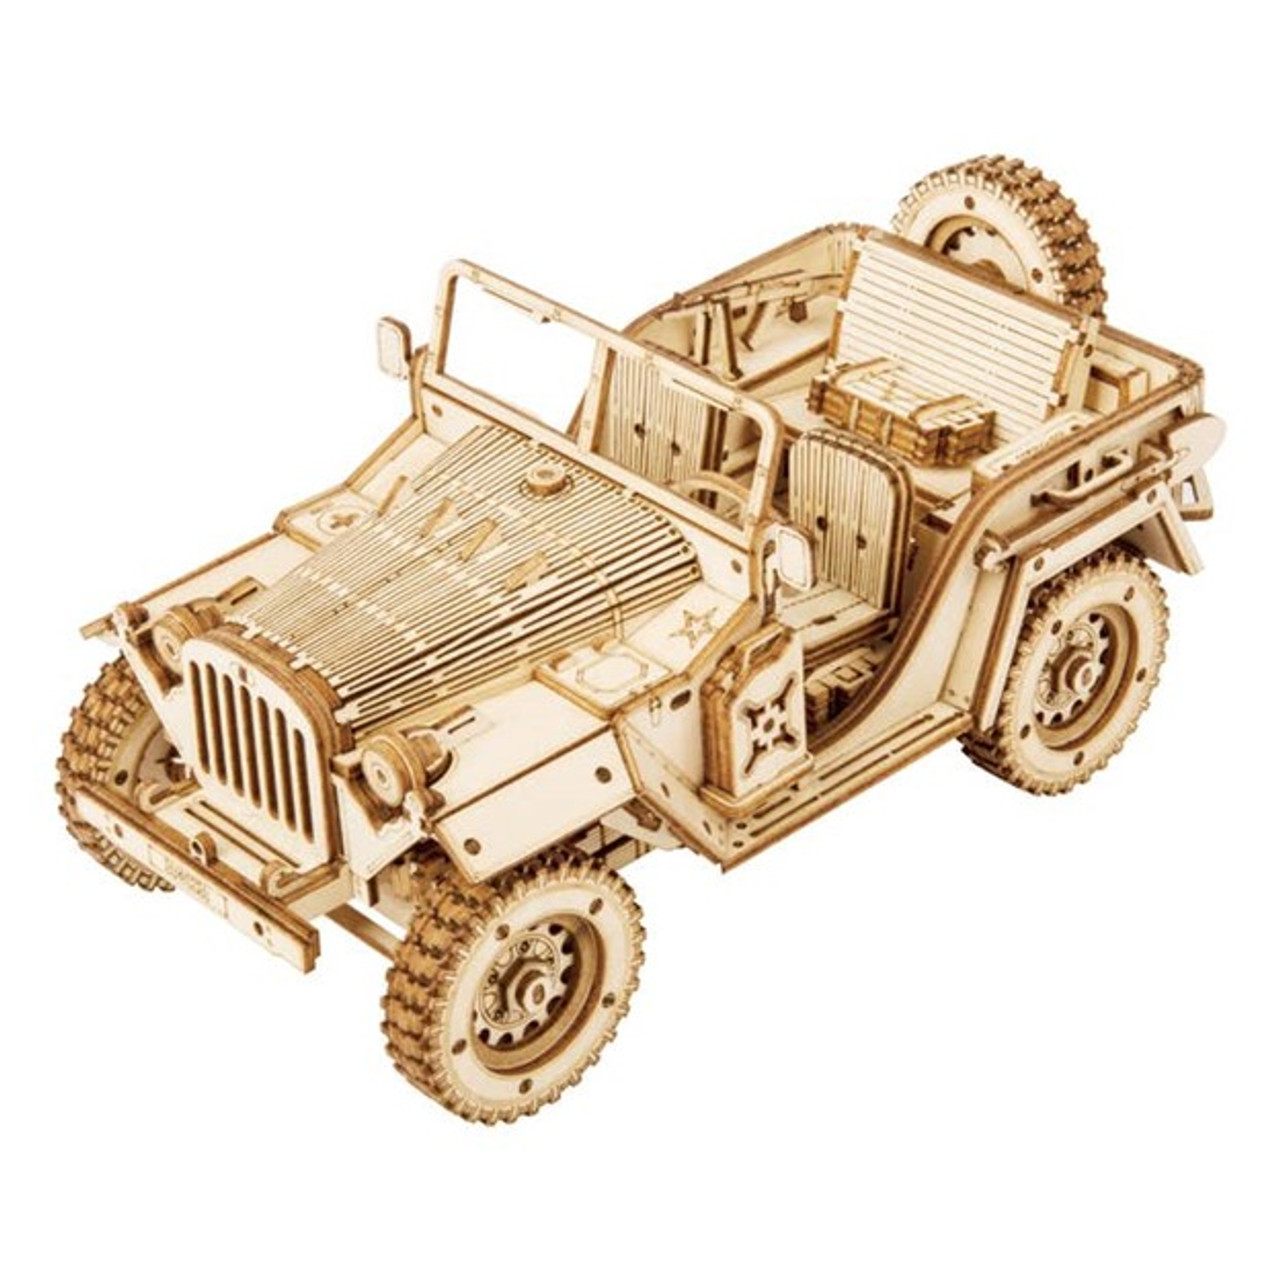 Army Field Car -3D Wooden Puzzle: